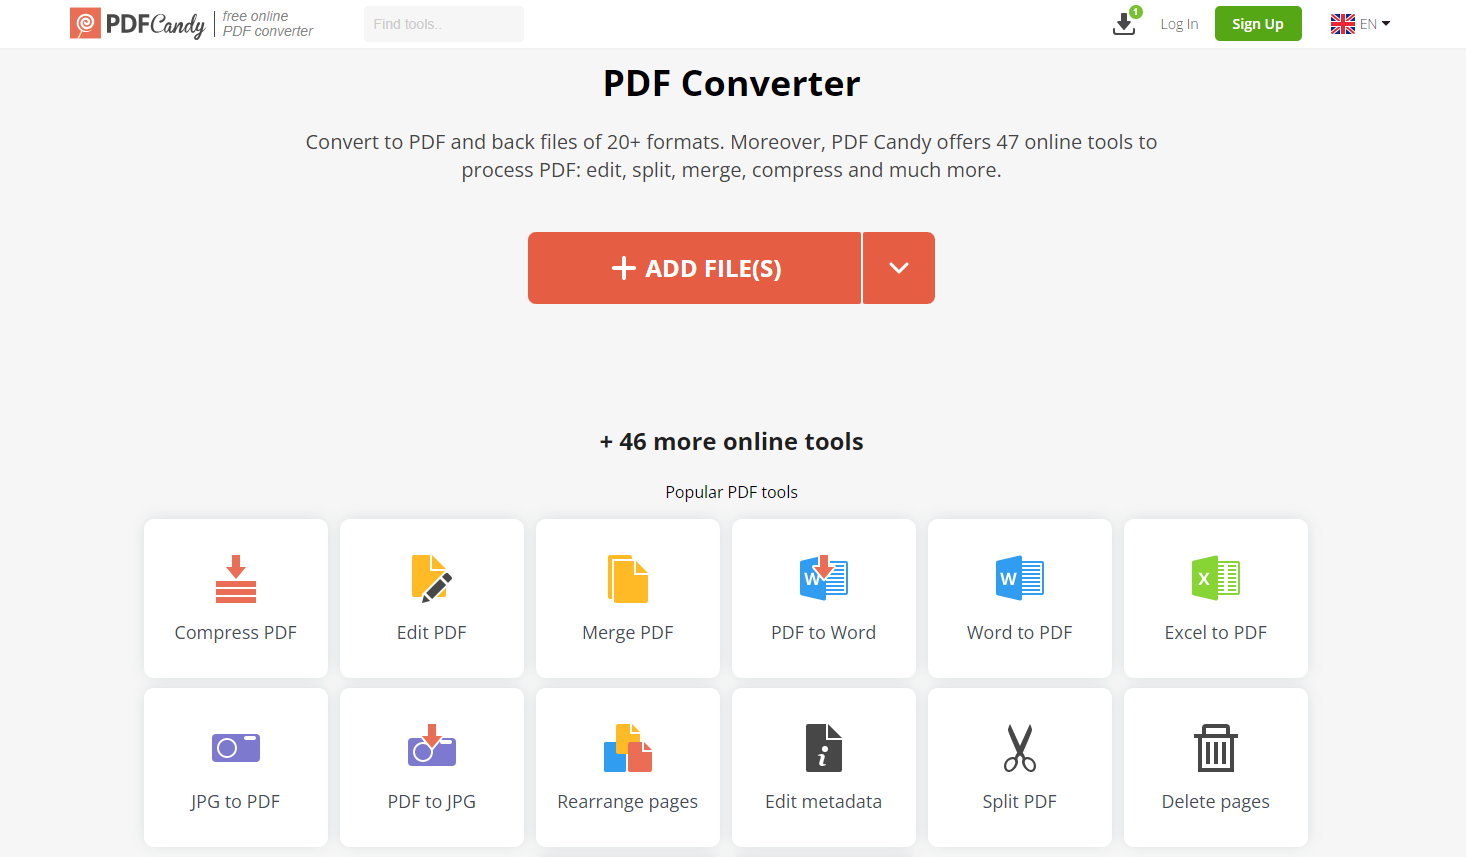 Screenshot of free online PDF Editor PDF Candy in action